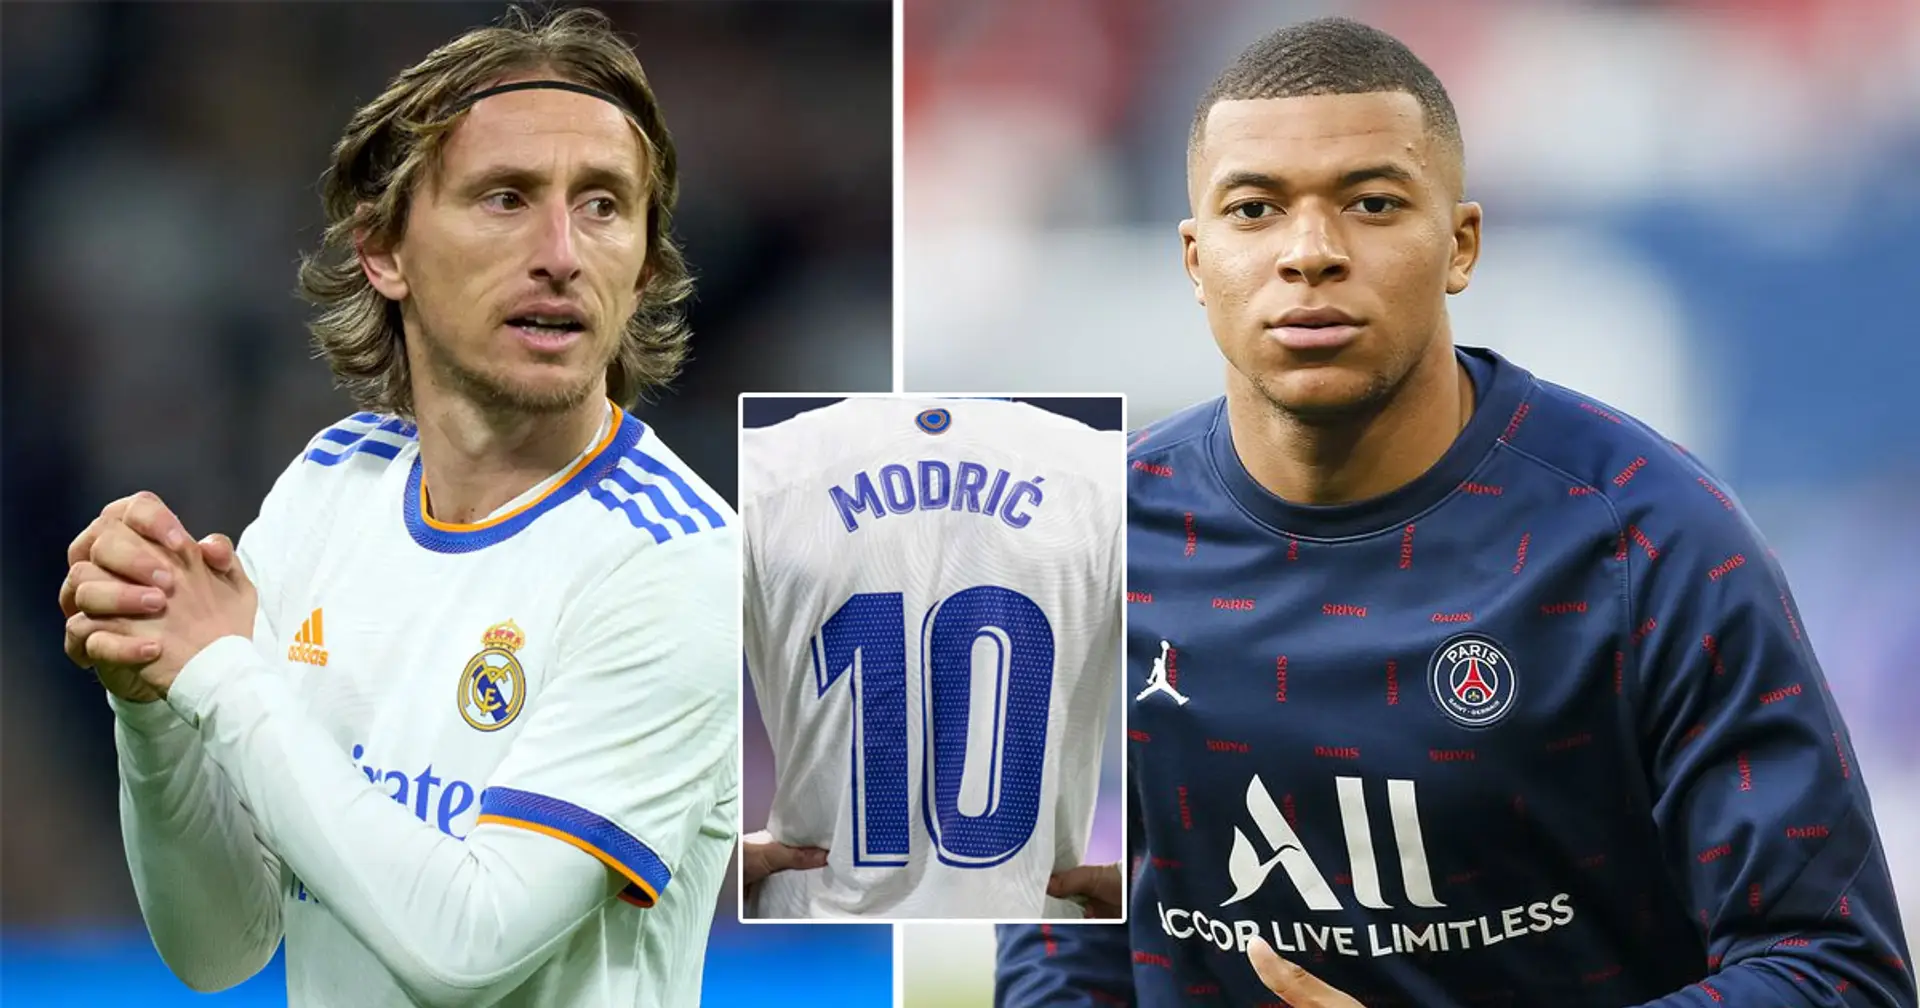 Modric reportedly agreed to let Mbappe take no.10 jersey at Real Madrid